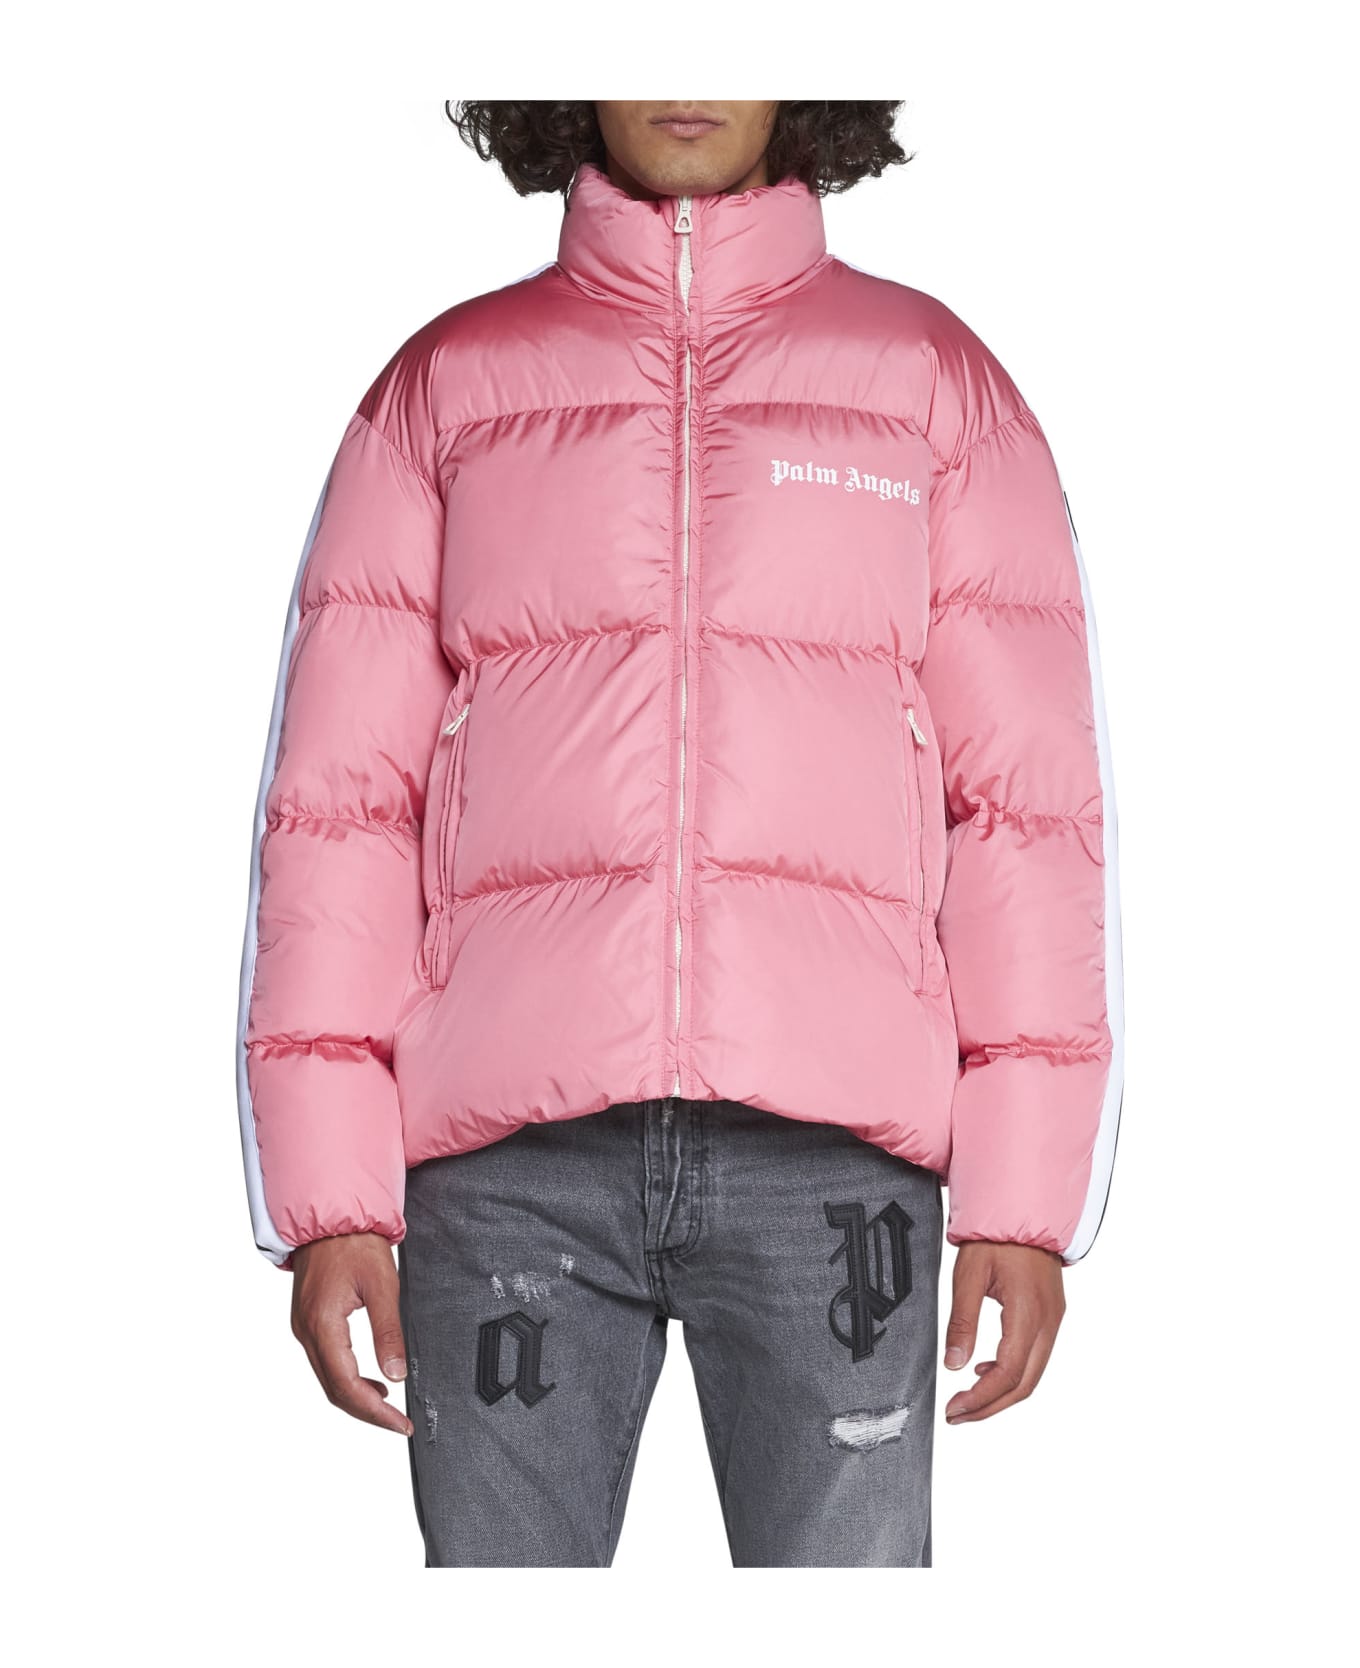 Palm Angels Down Jacket - Pink white